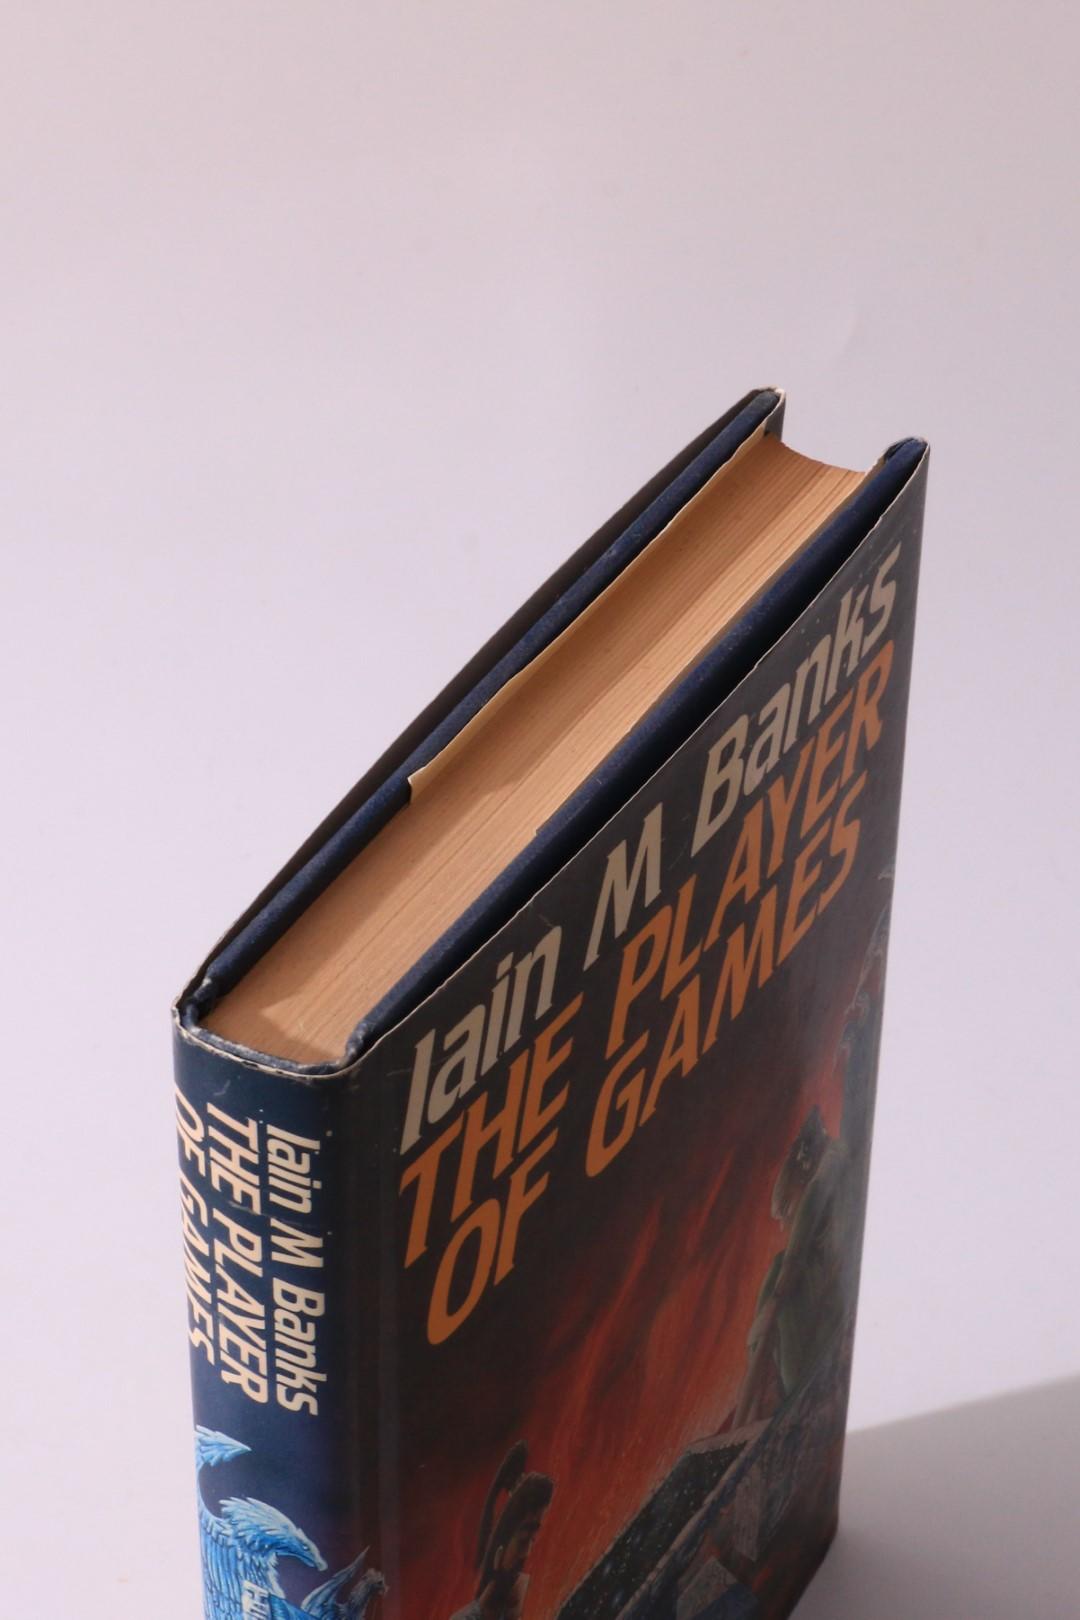 Iain M. Banks - The Player of Games - Macmillan, 1988, First Edition.